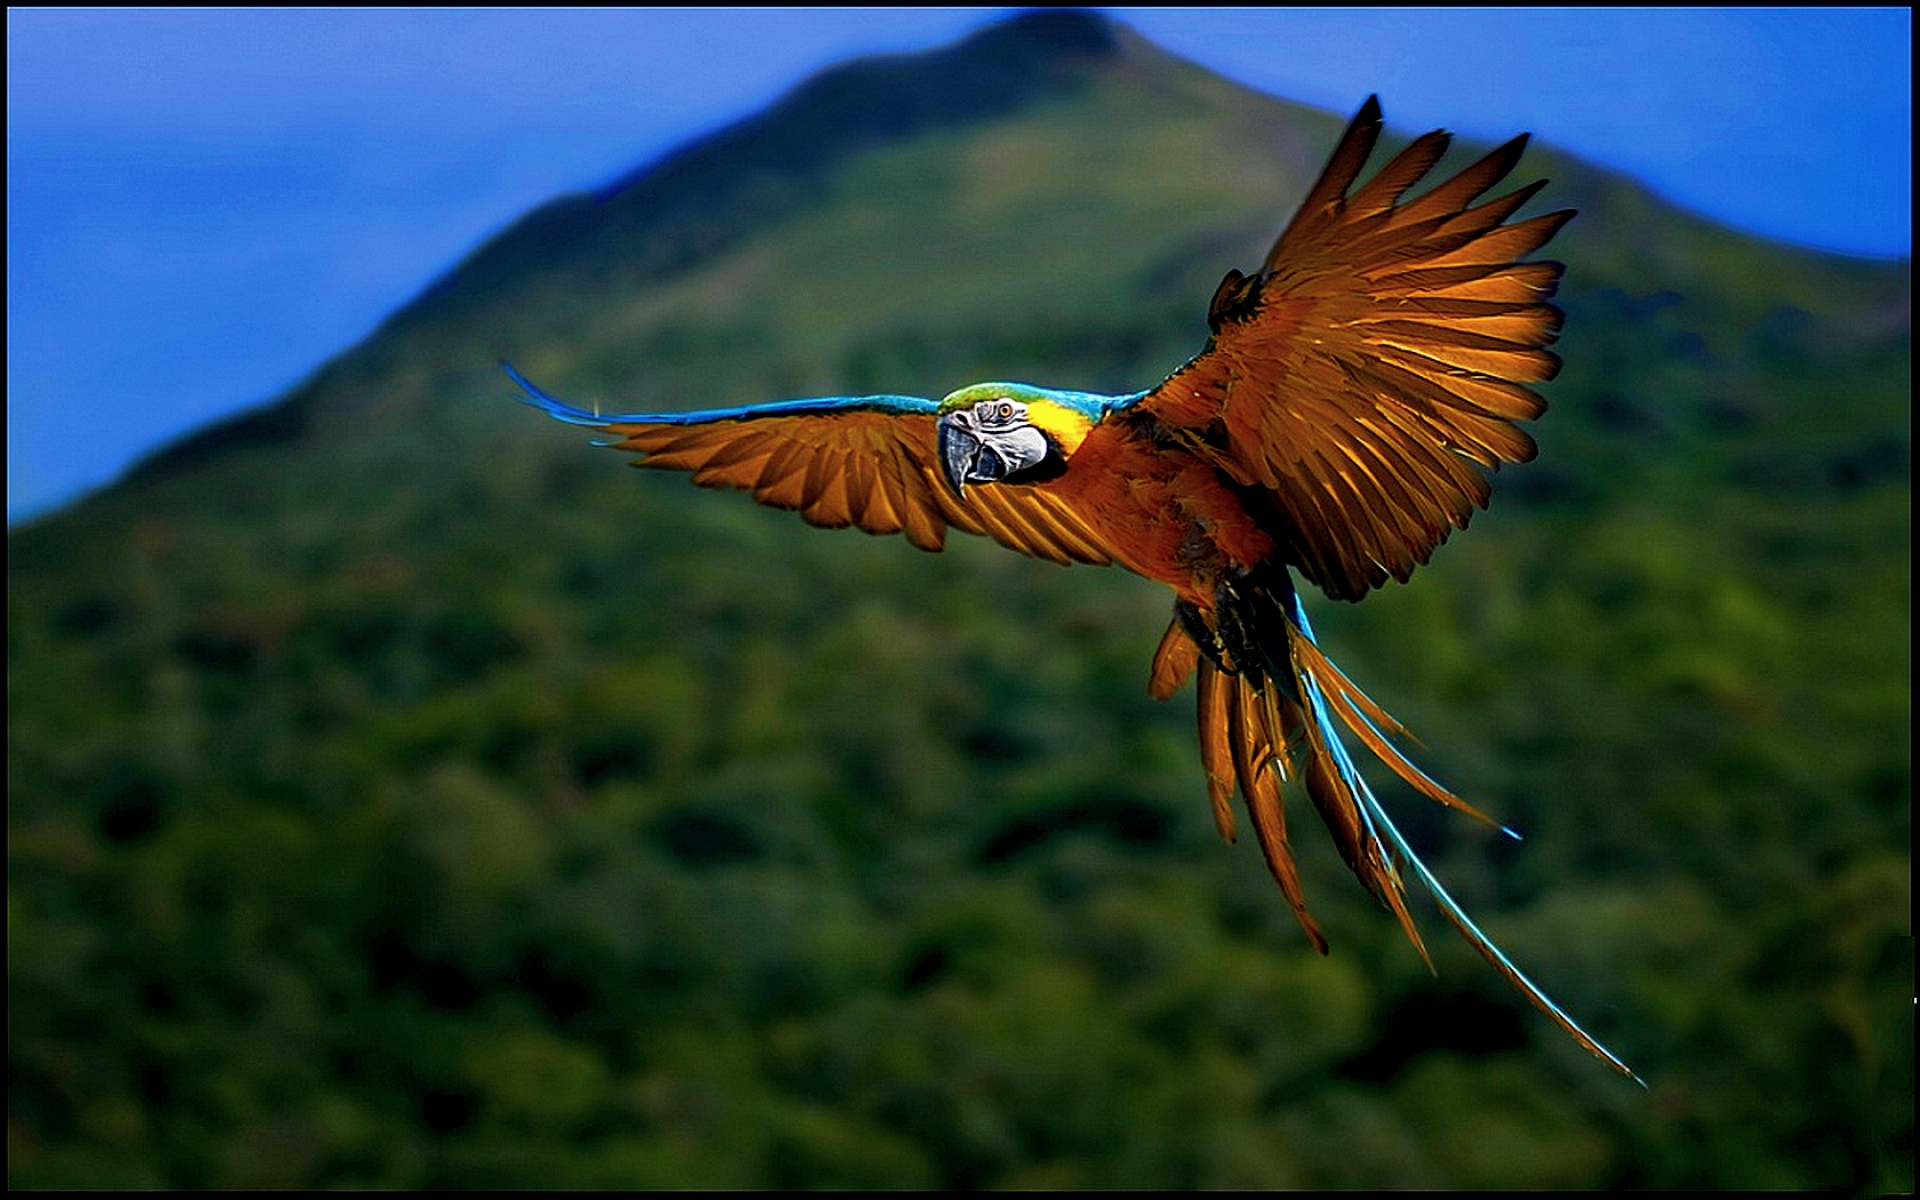 Colorful Creatures of Flight